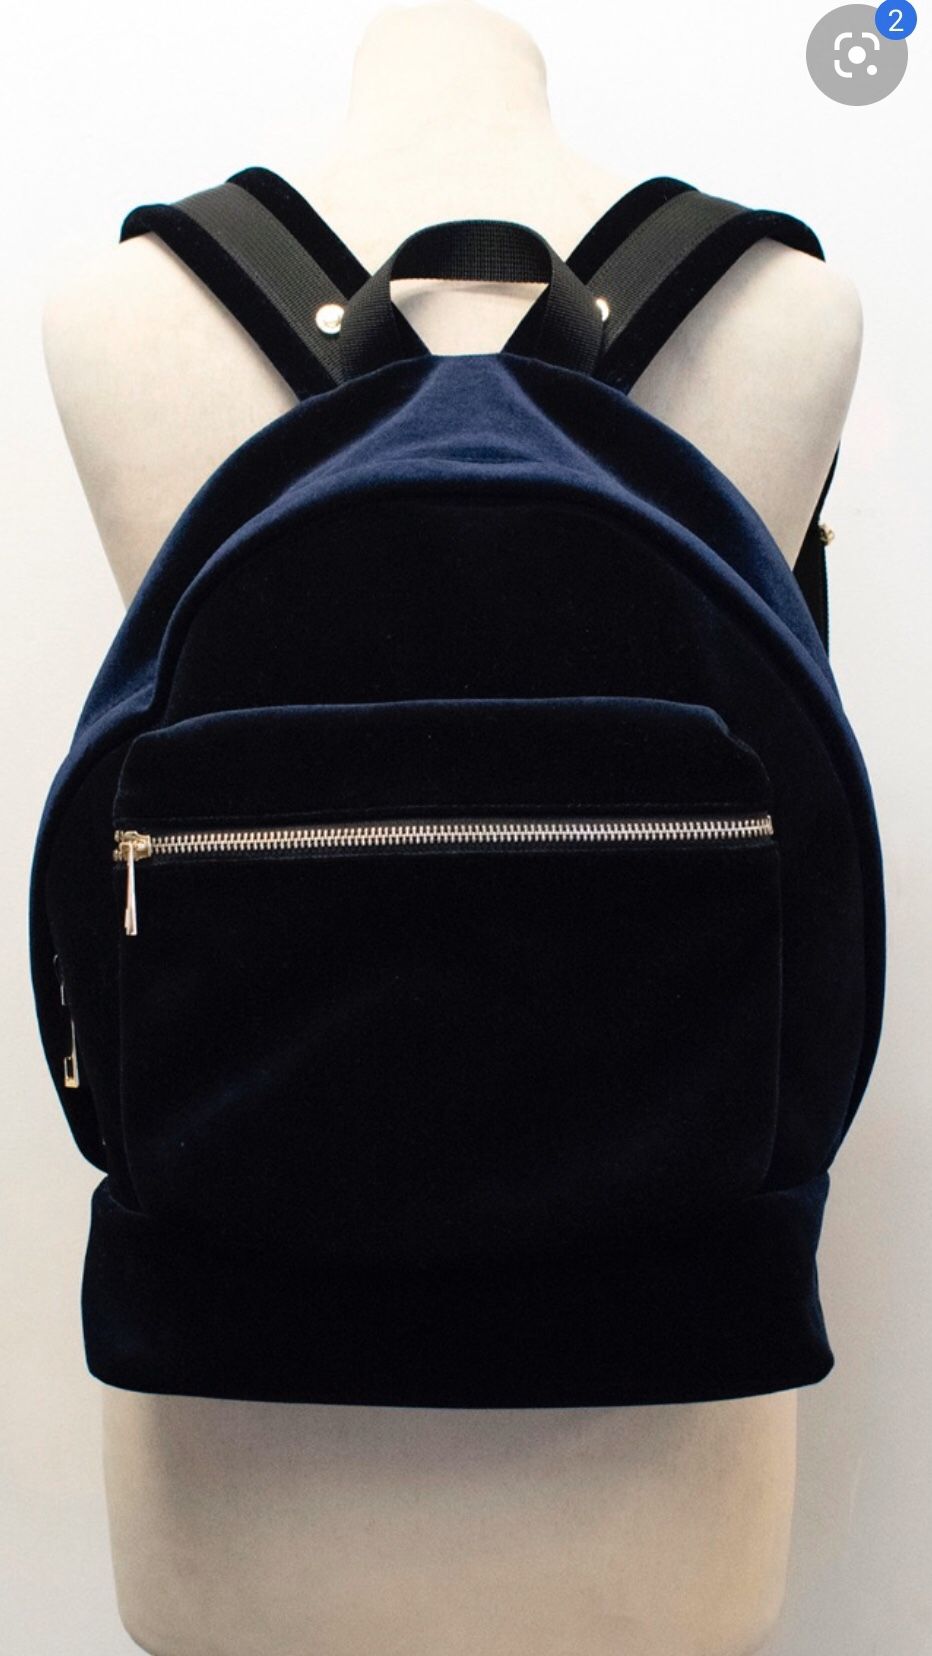 Sandro Womens Velvet Backpack Dark Navy with silver Hardware - excellent condition (retail value $225)